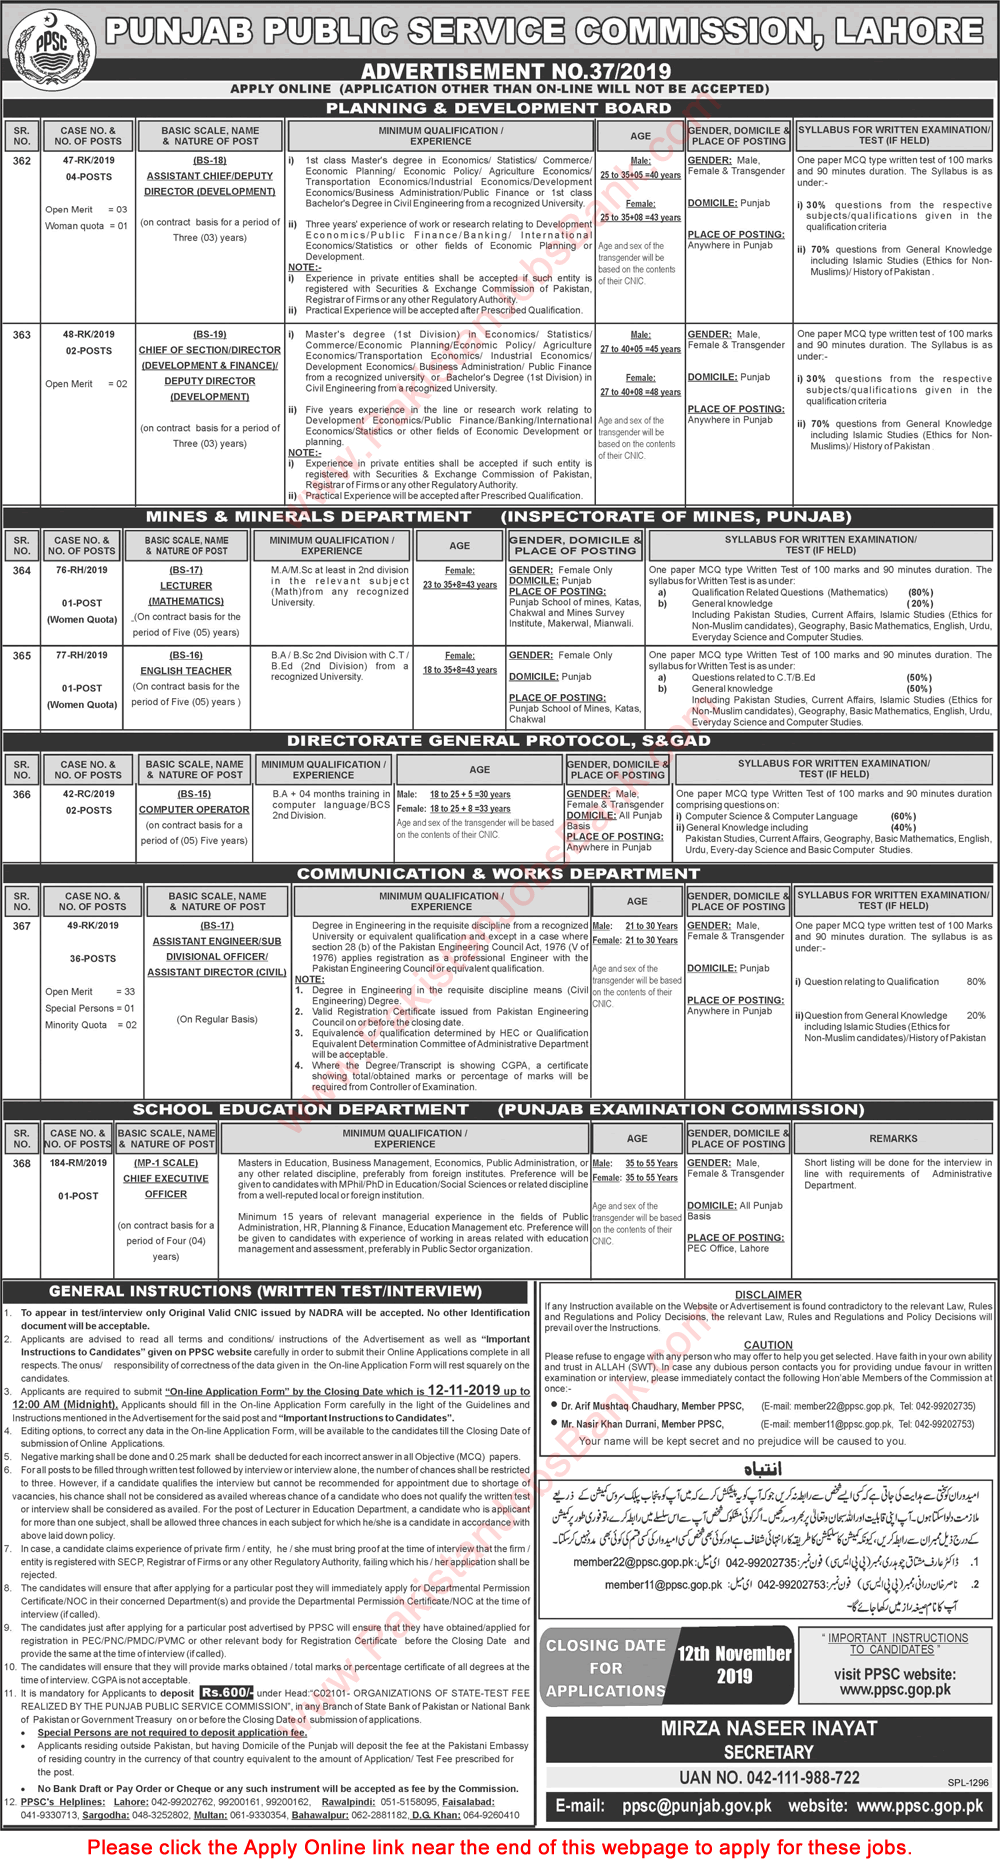 PPSC Jobs October 2019 November Apply Online Consolidated Advertisement No 37/2019 Latest